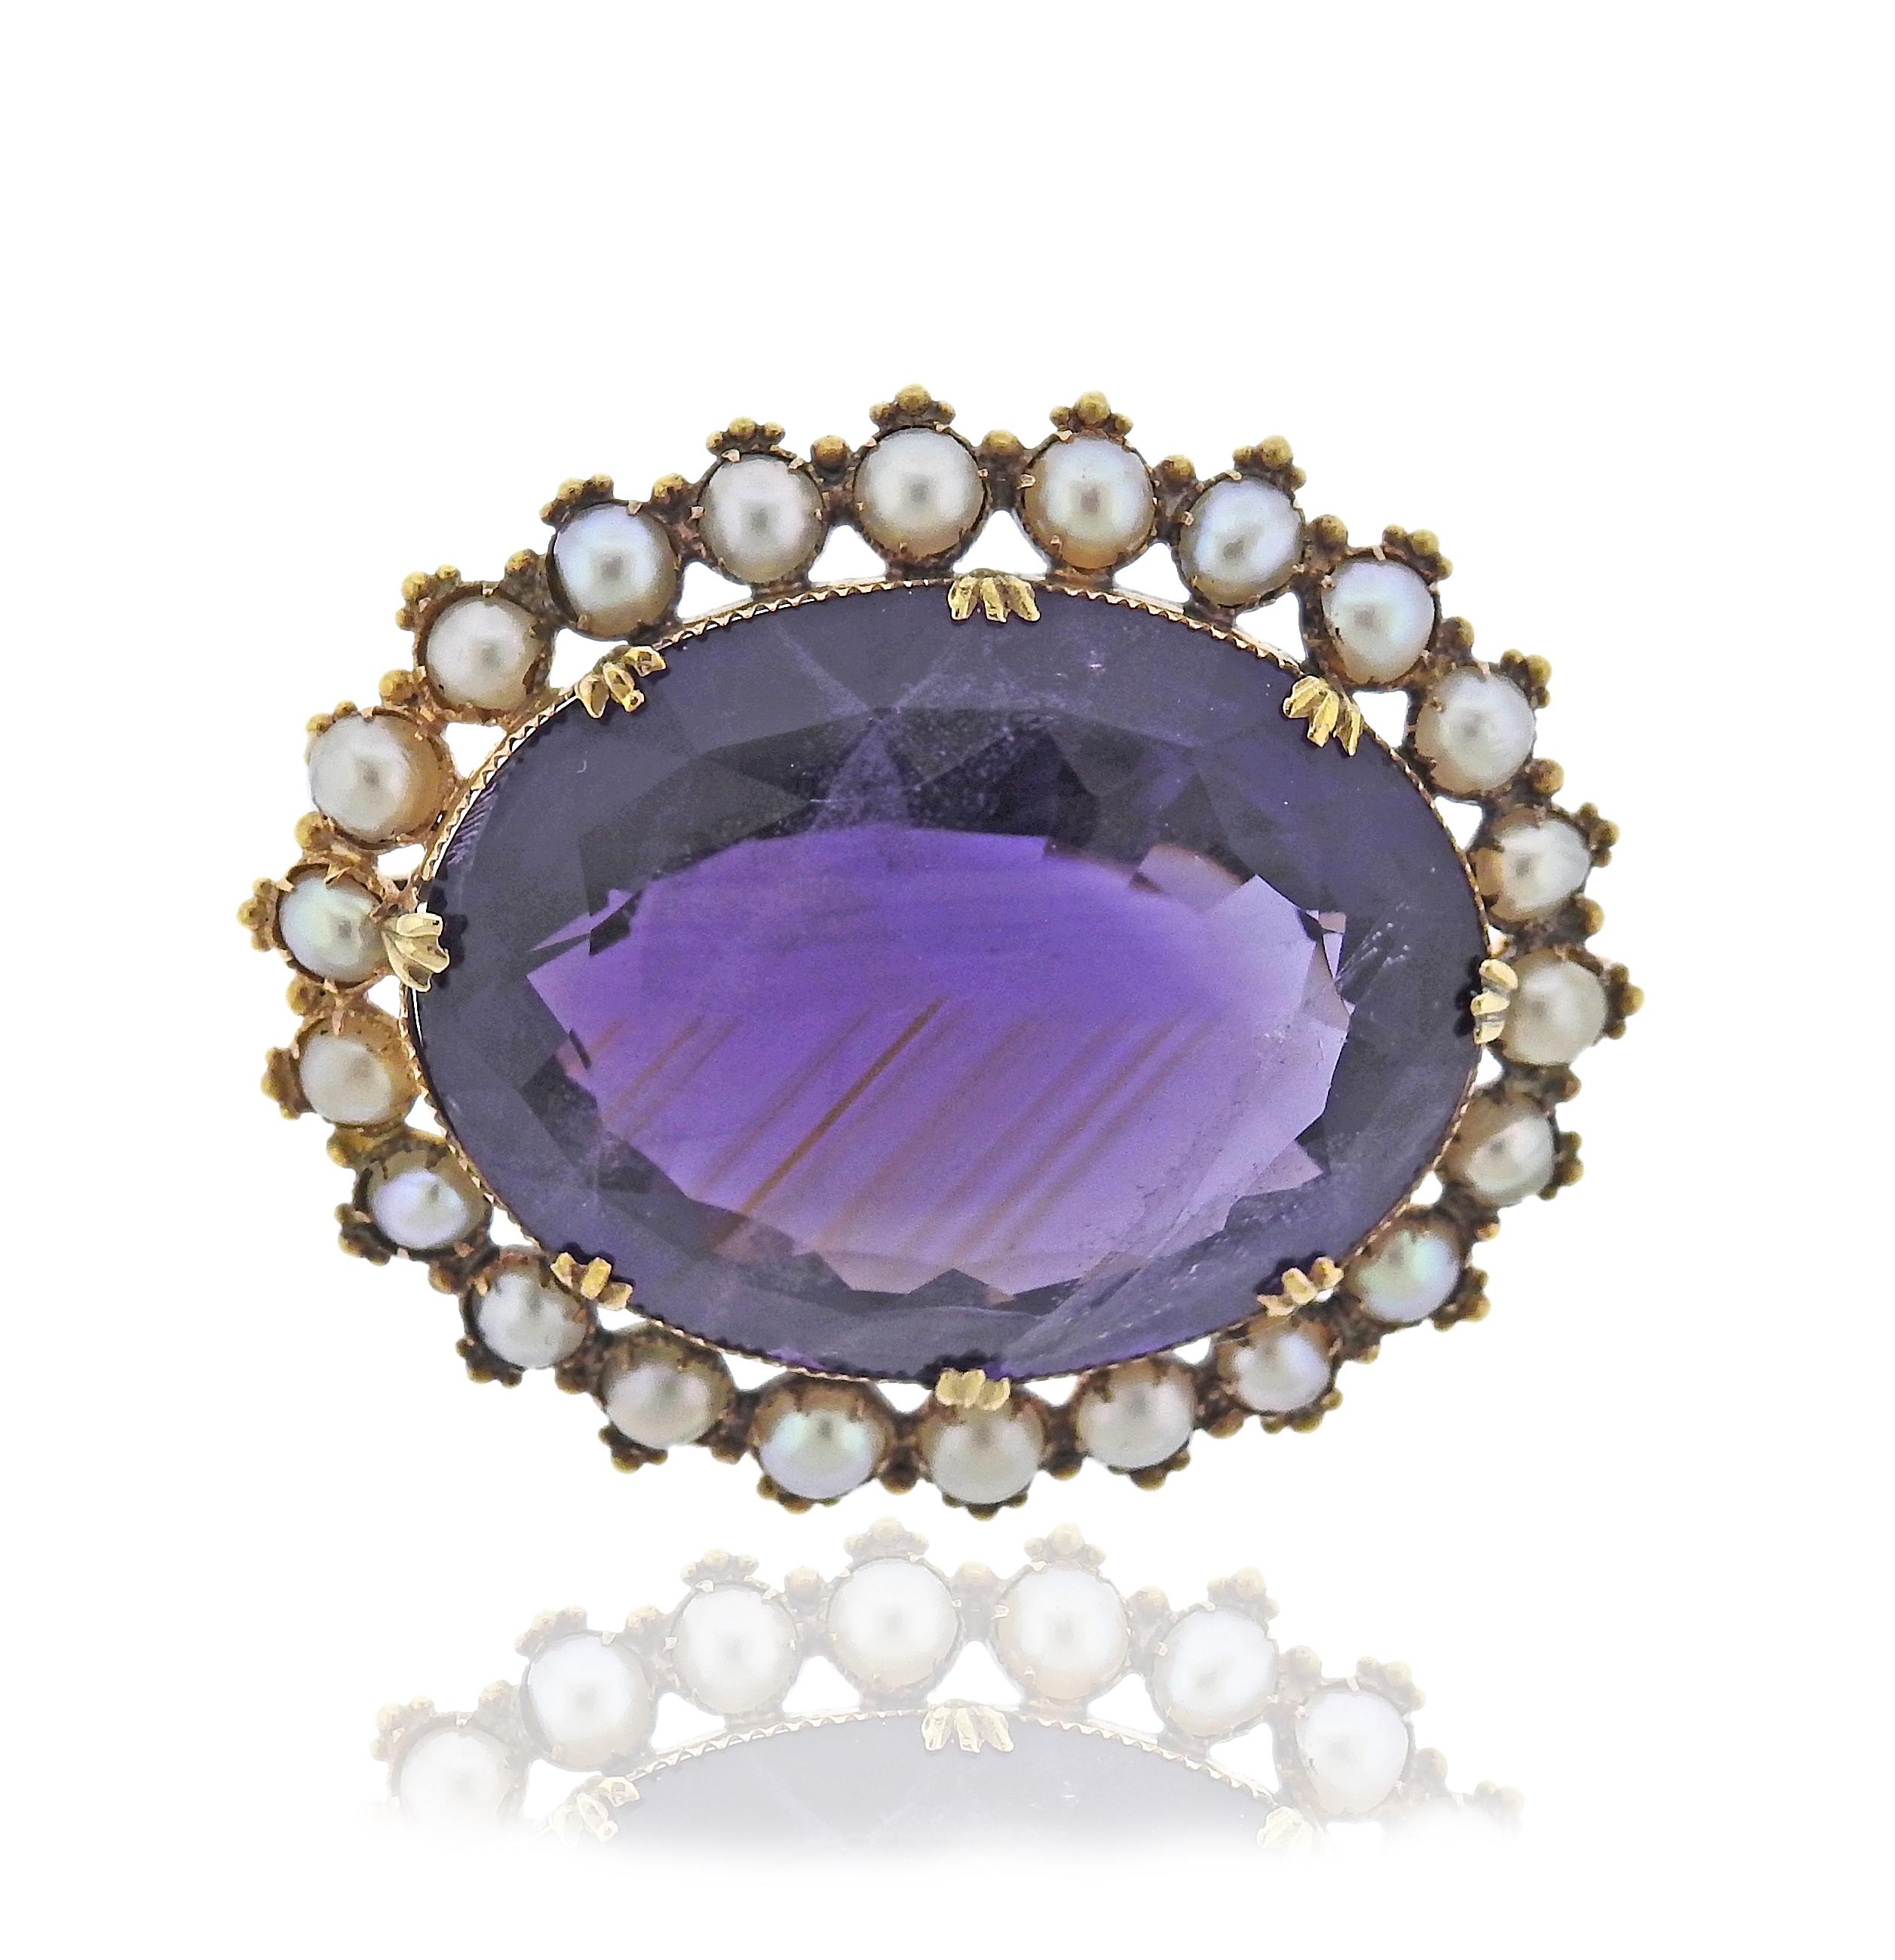 Antique 14k gold brooch, with center amethyst (with small chips present) surrounded with pearls. Brooch is 45mm x 36mm. Weight - 20 grams.